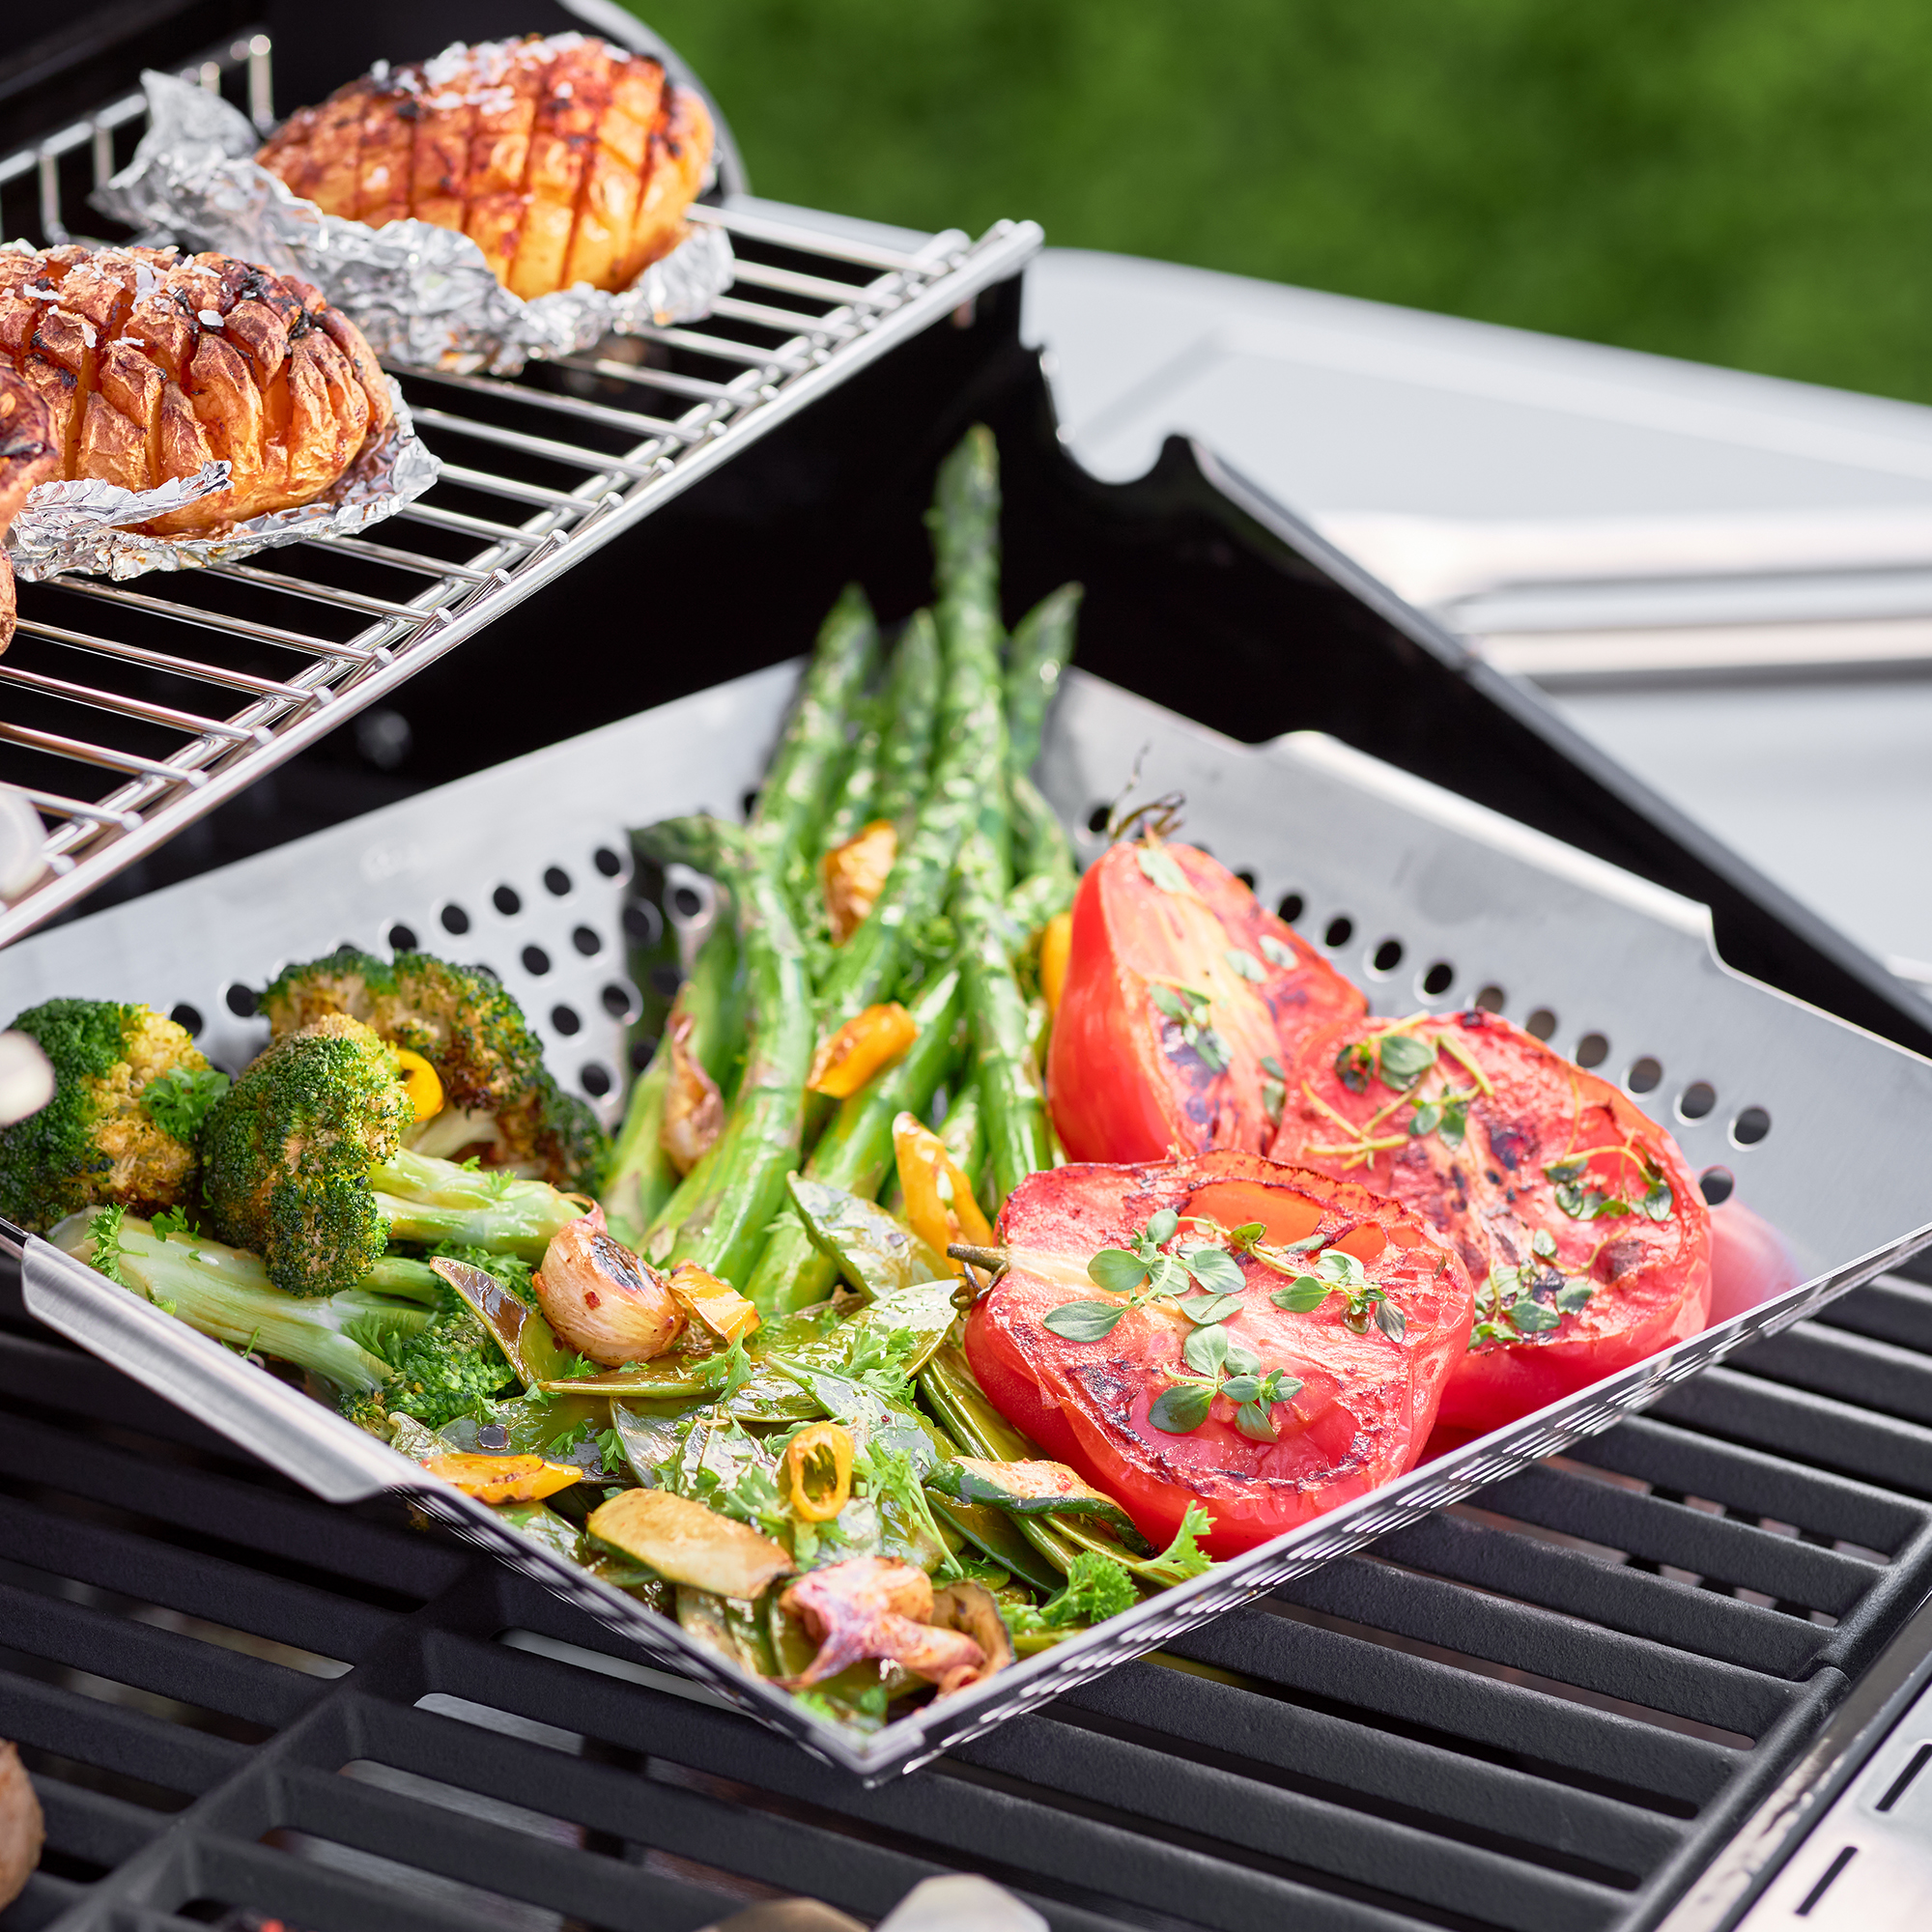 Grill and vegetable pan